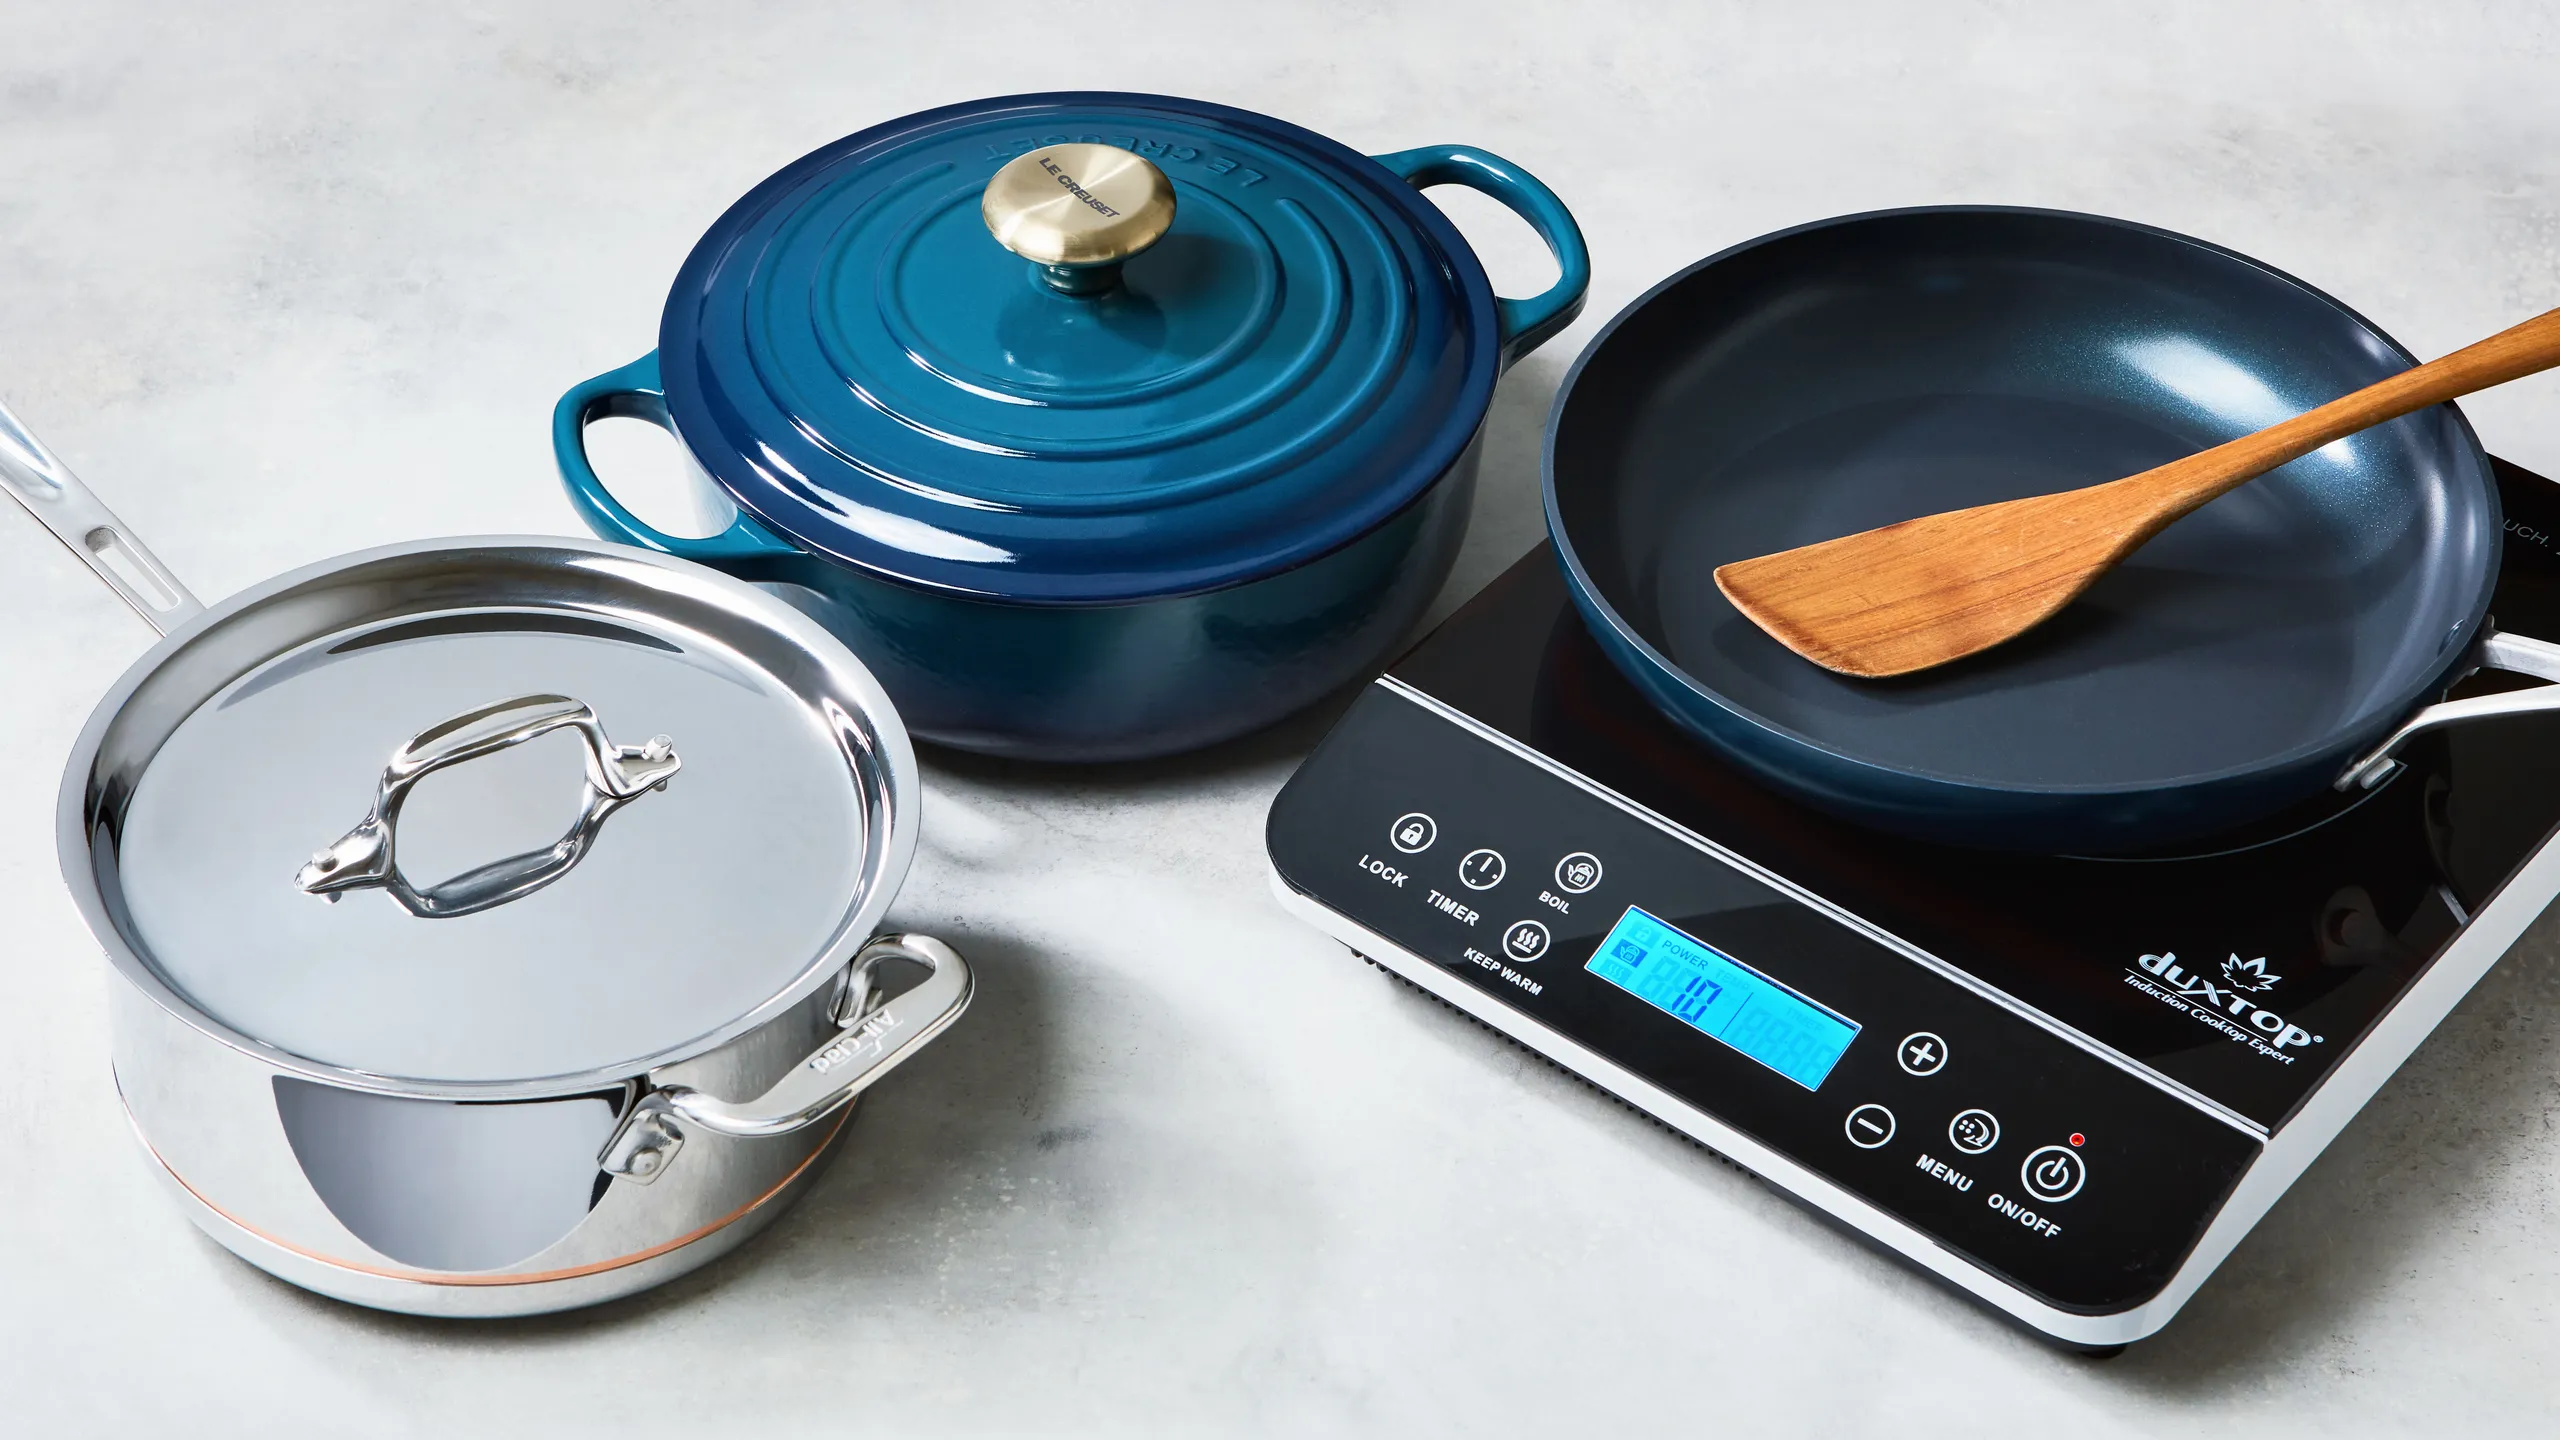 What Cookware To Use With Induction Cooktop